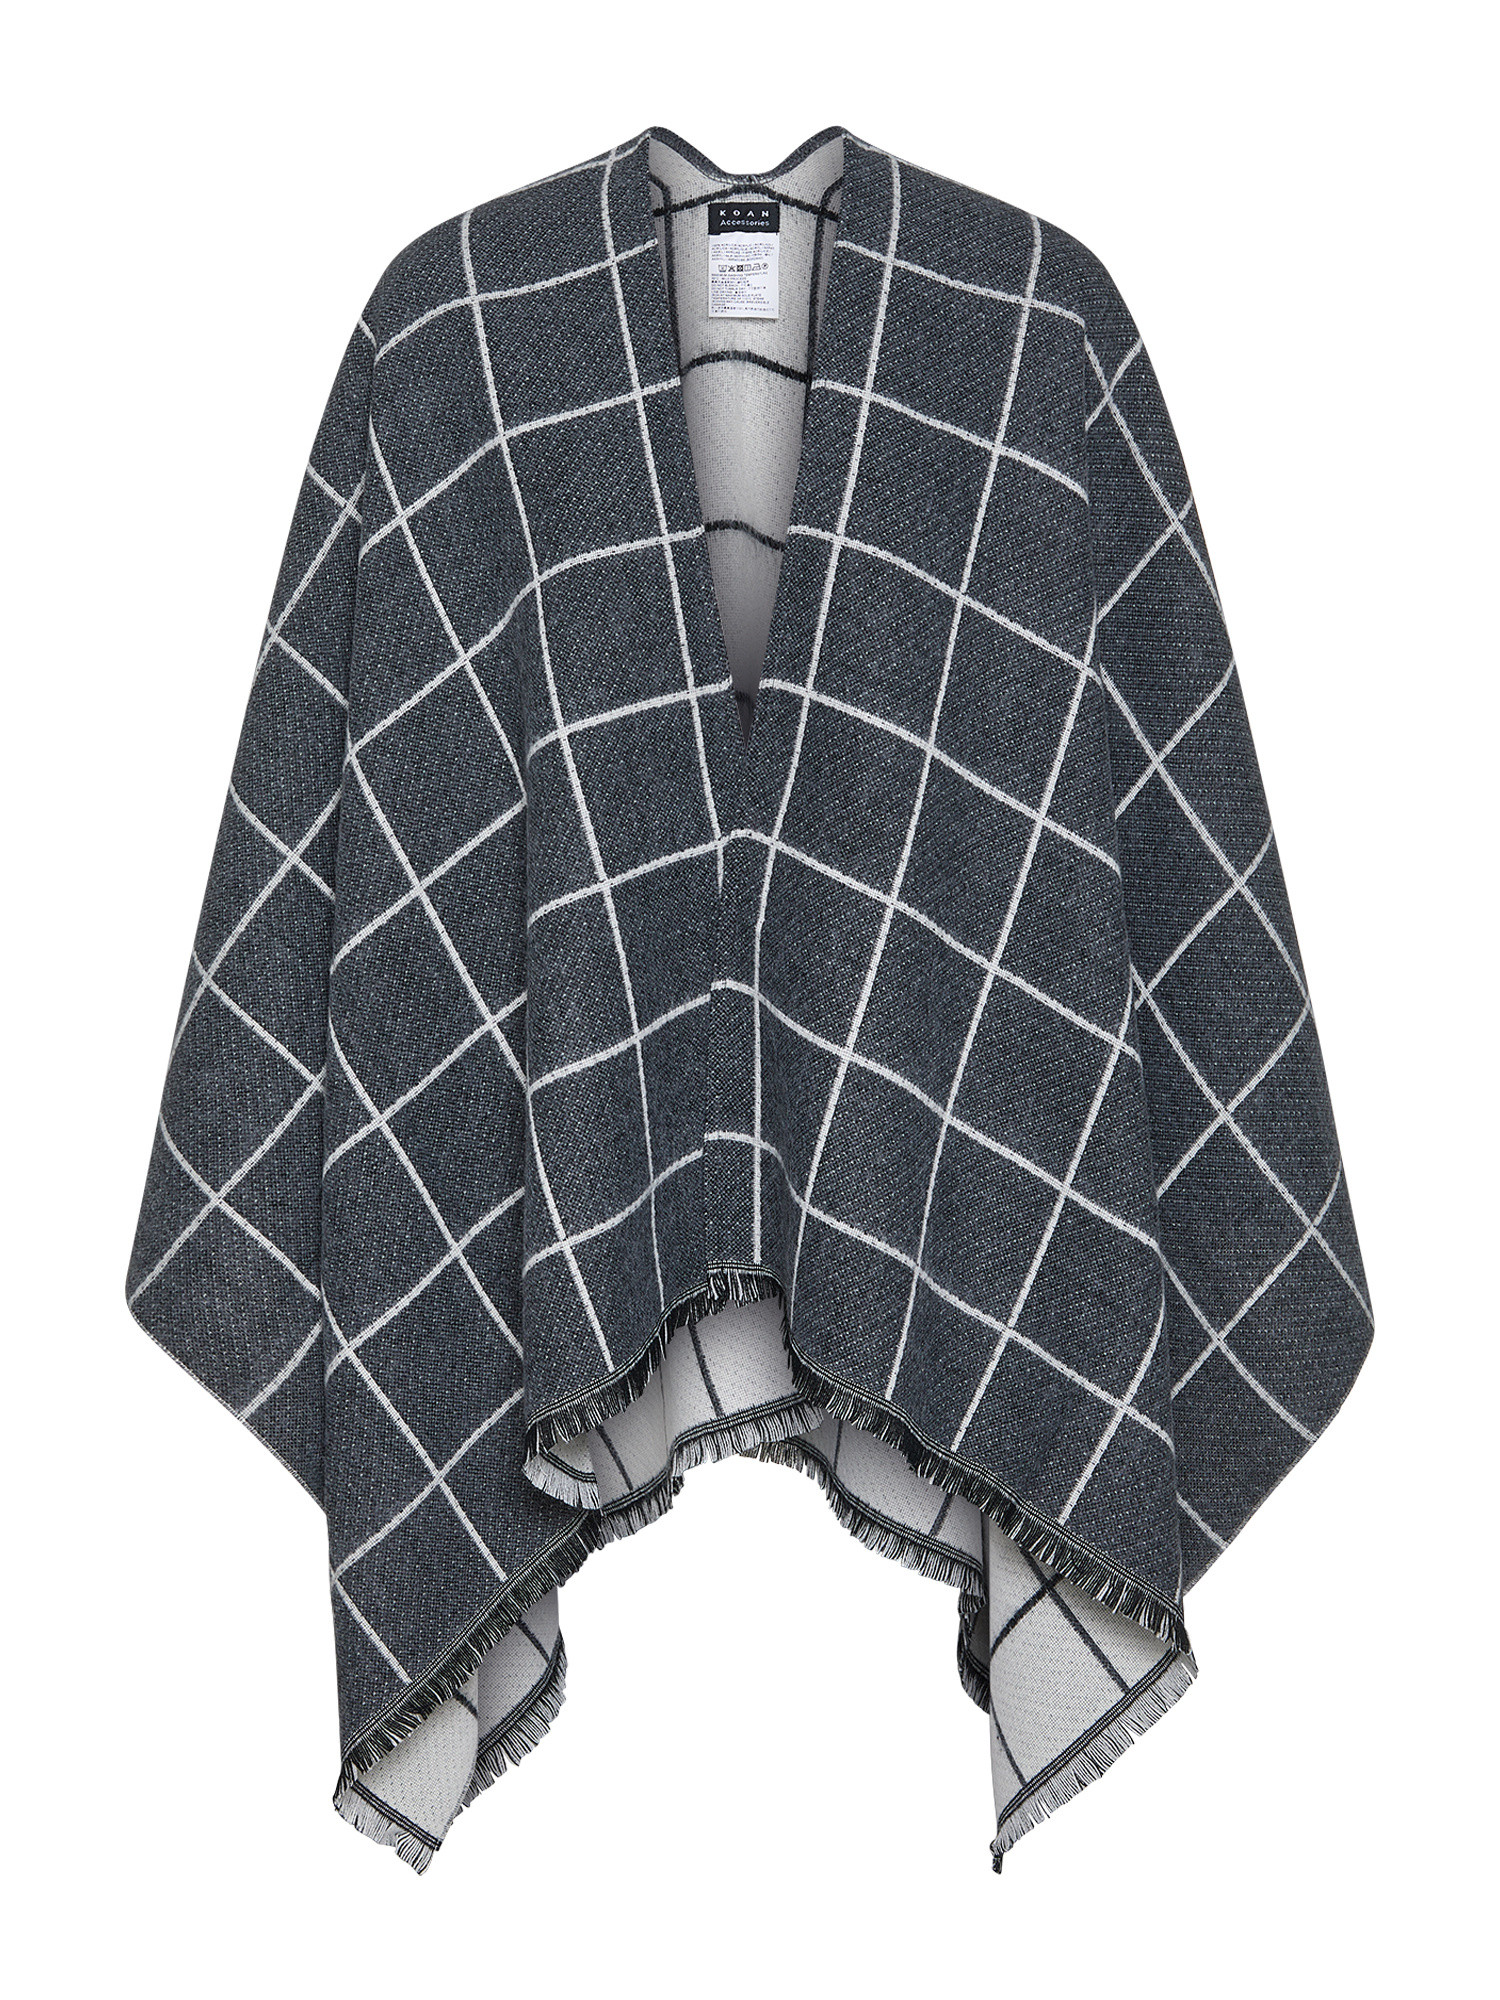 Koan - Checked cape, Grey, large image number 0